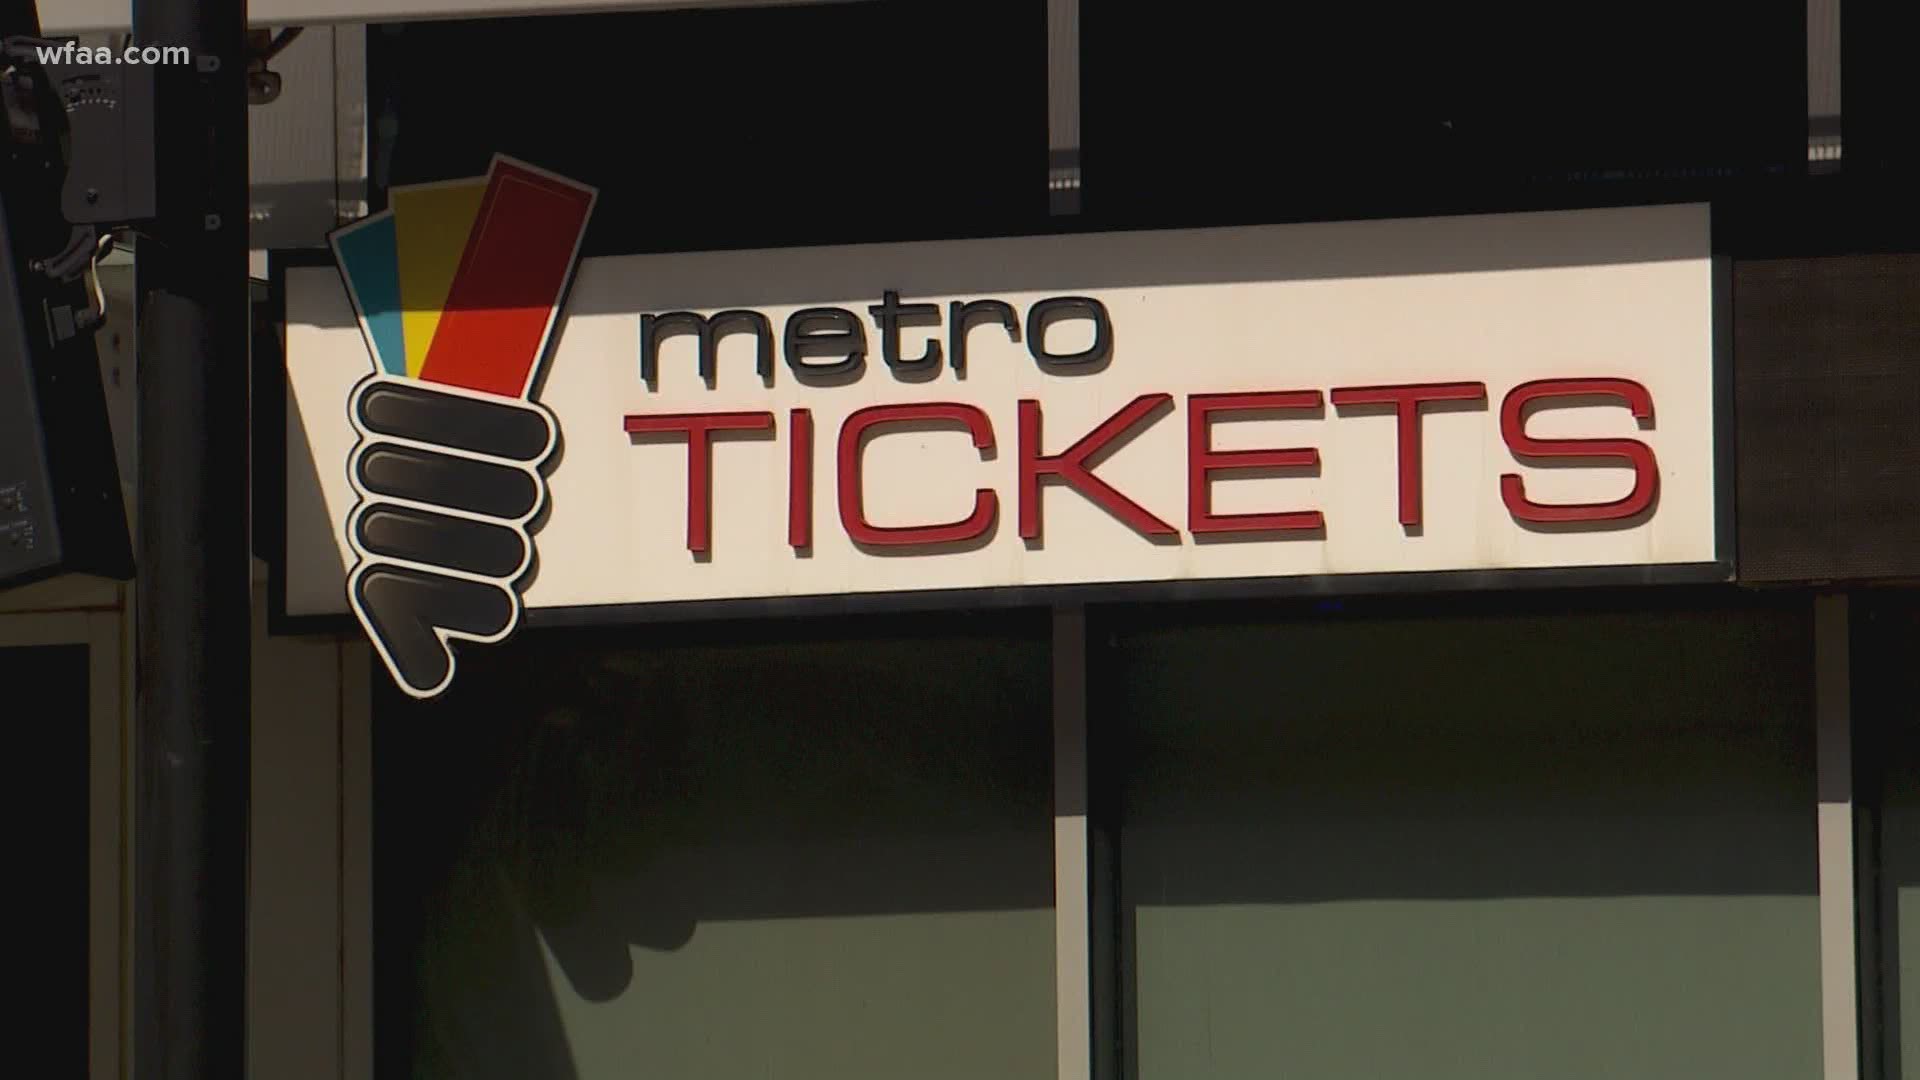 Metro Tickets has been in Dallas since 1992, and has been a staple for sports fans along with music lovers when it comes to getting access to concerts and games.